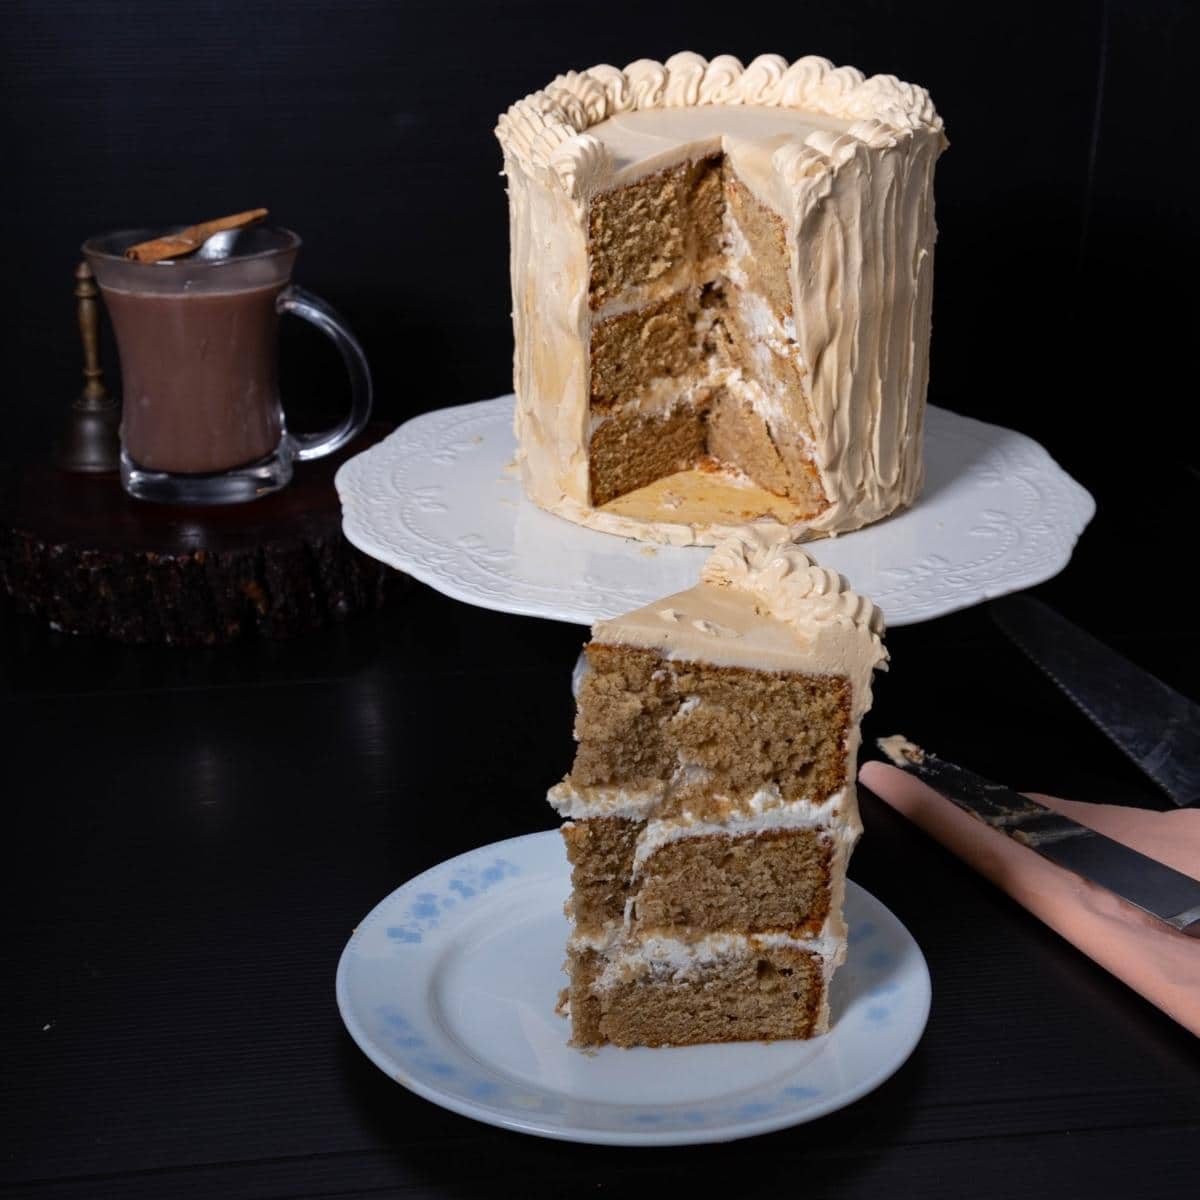 A slice of a layer cake with buttercream frosting on a plate.